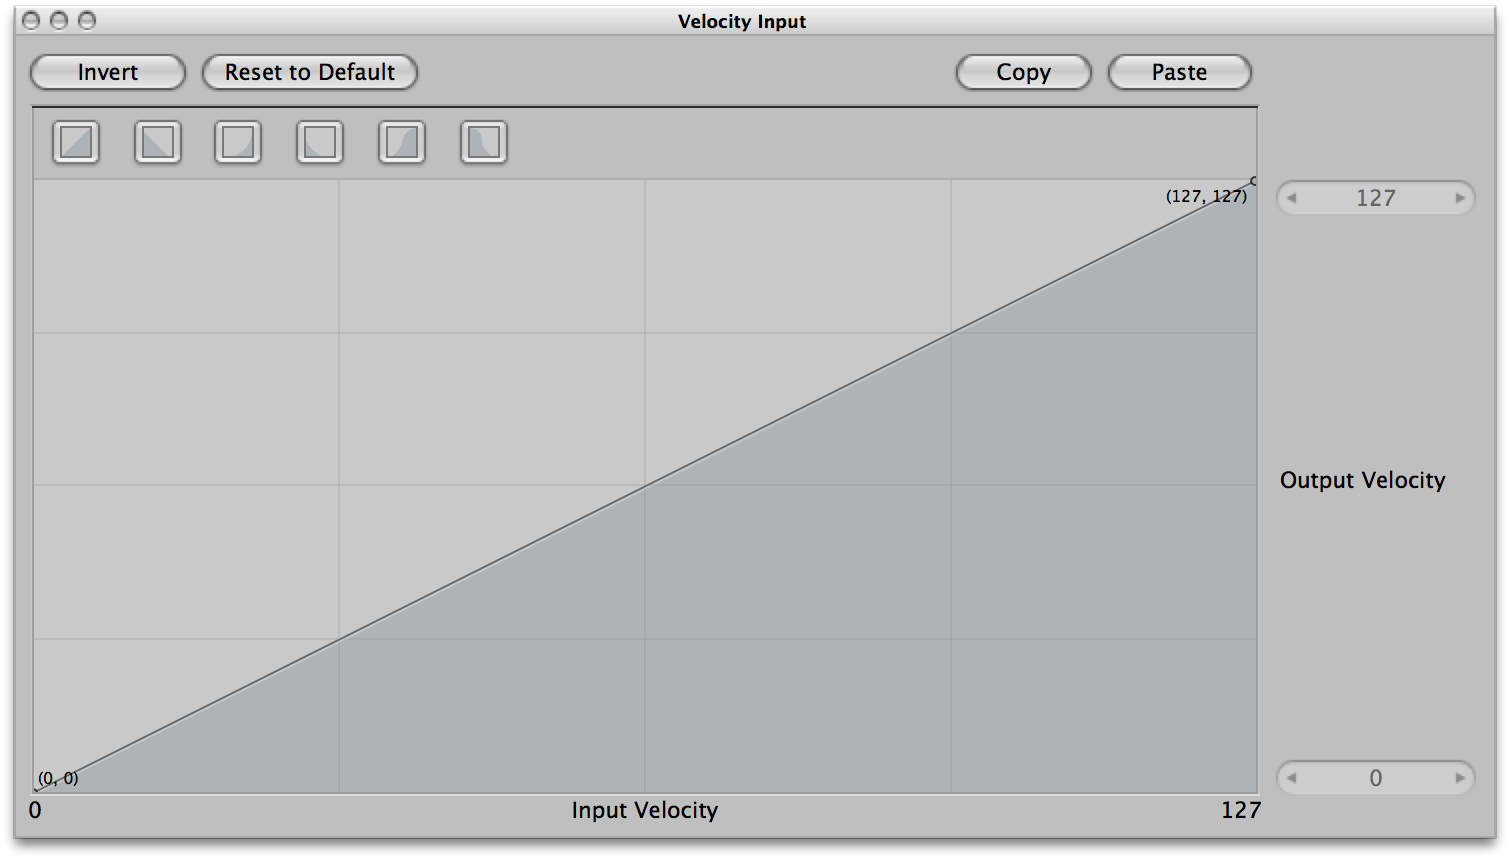 The MainStage velocity graph ranges from 0 to 127.